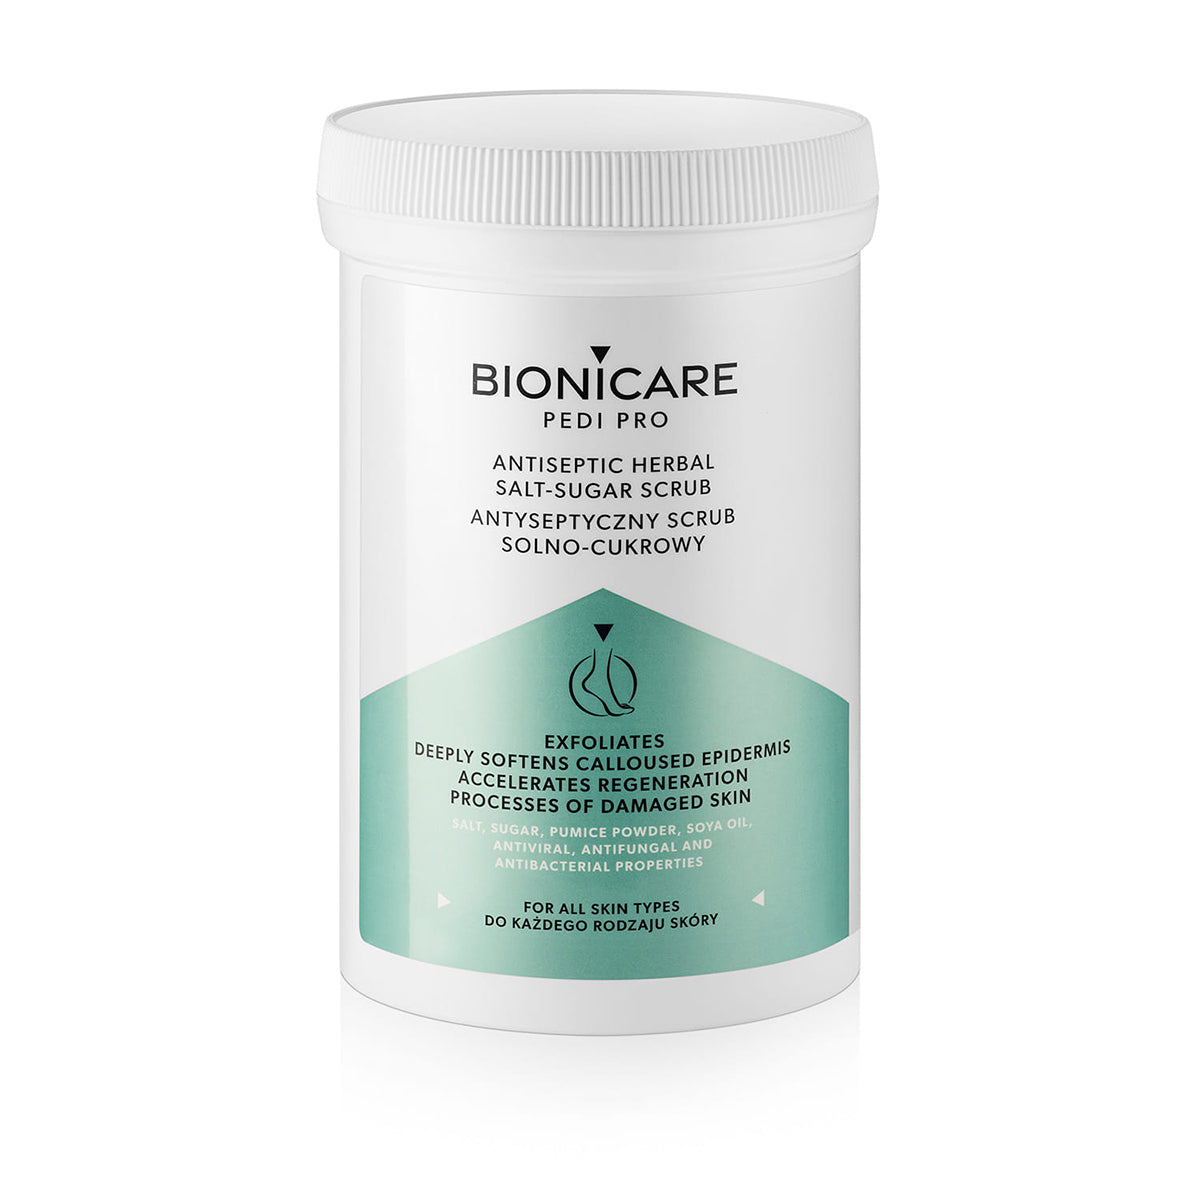 BIONICARE GOMMAGE ANTISEPTIQUE SEL-SUCRE 500 g